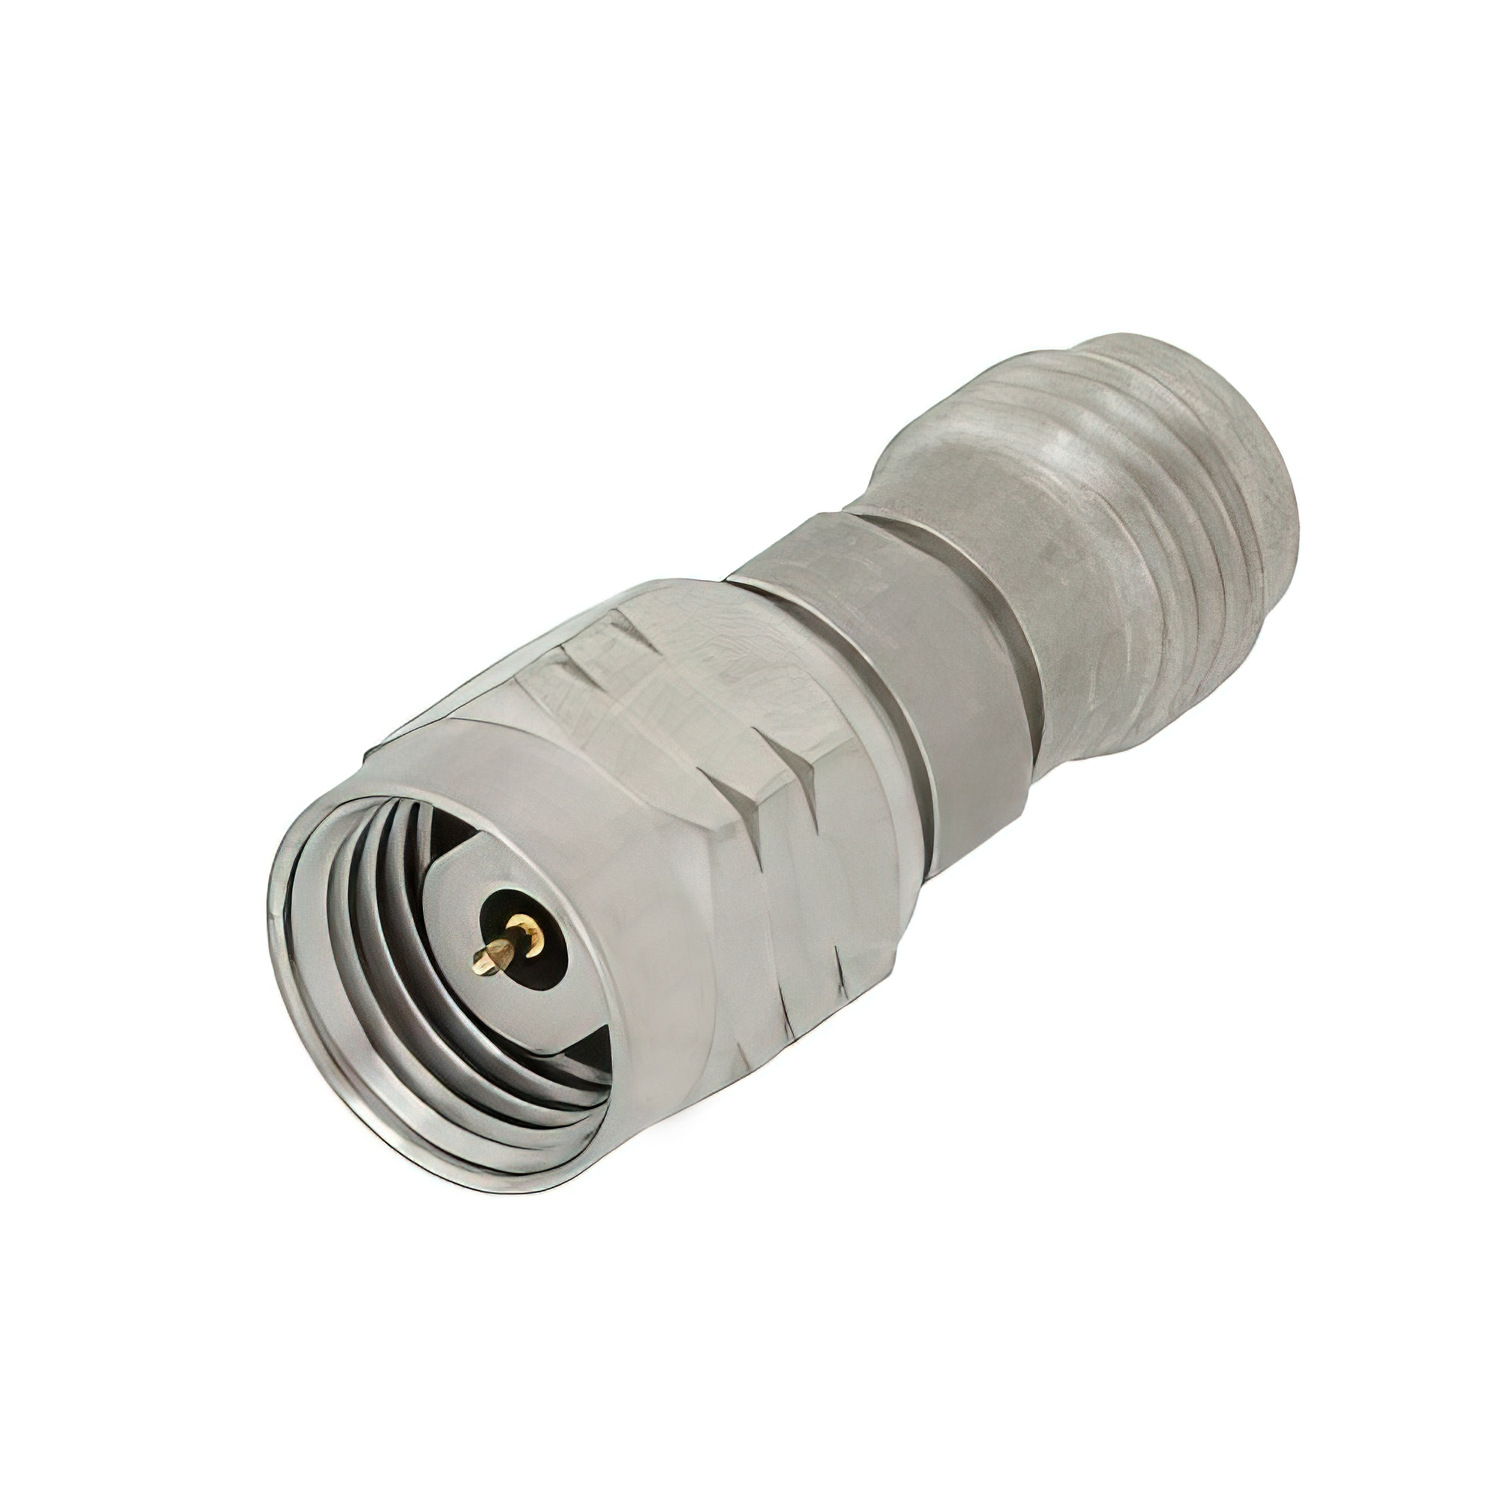 1.85mm male to 1.85mm female adapter3